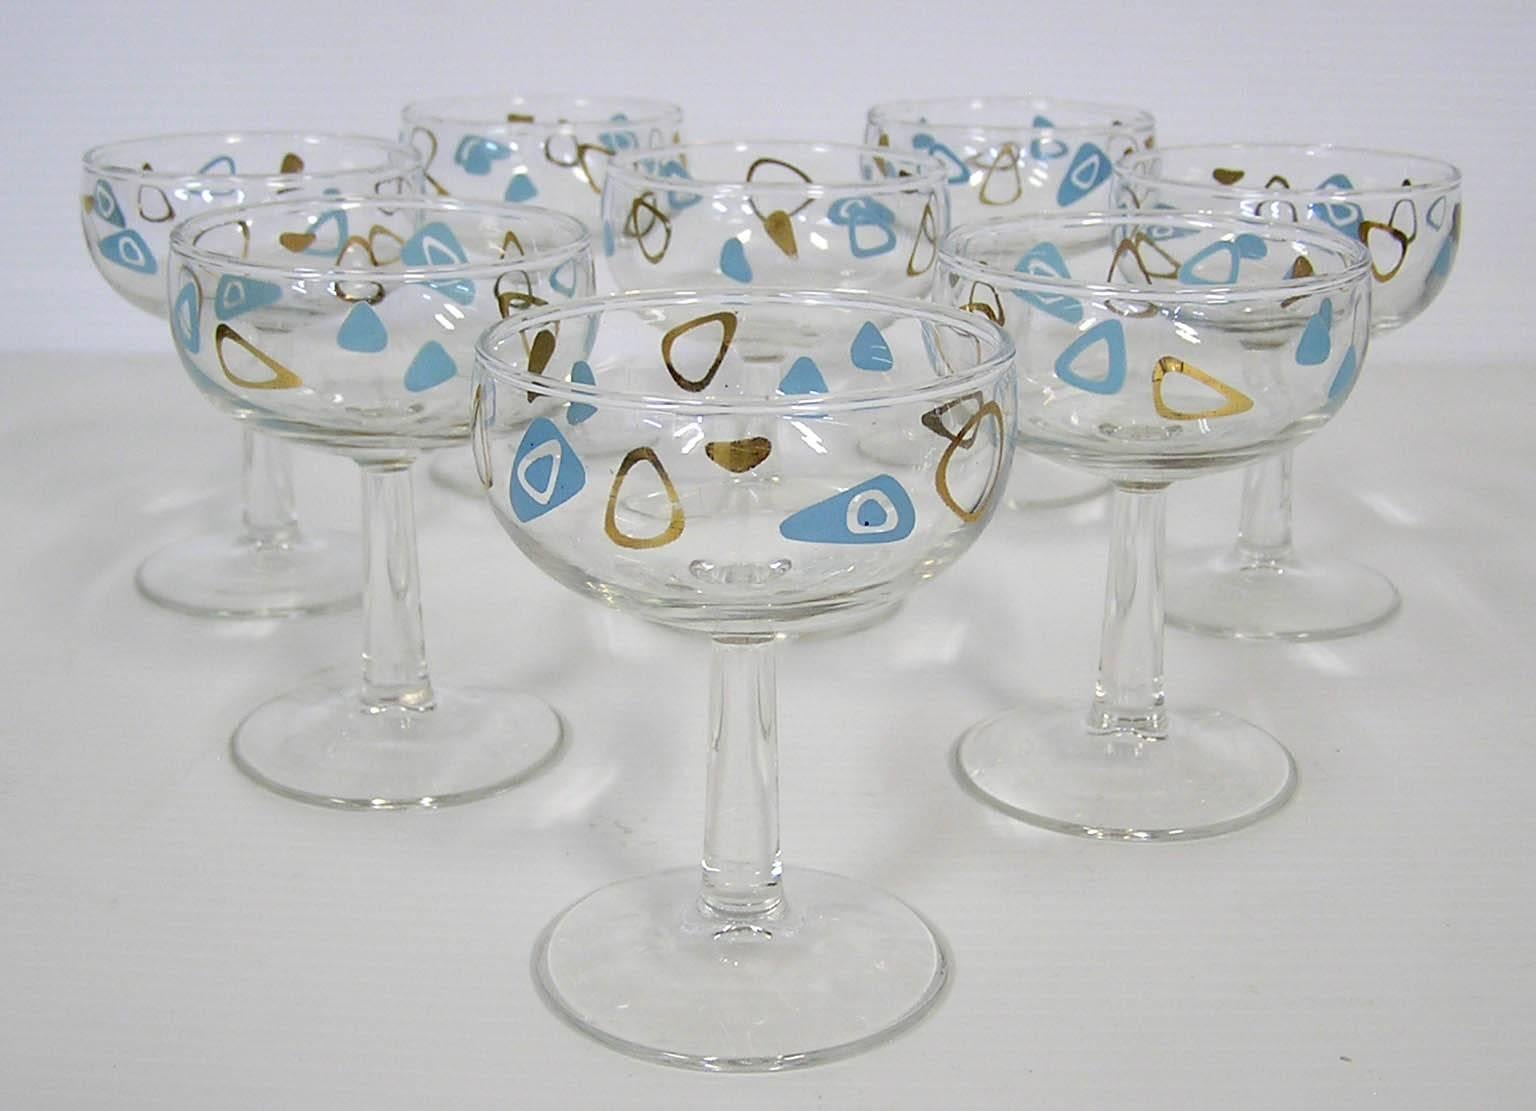 A set of eight champagne glasses from the 1950s, Mid-Century Modern era. Manufactured by the federal glass company and commonly referred to as amoeba boomerang glasses the set is wonderfully decorated throughout in a turquoise and 22-karat gold